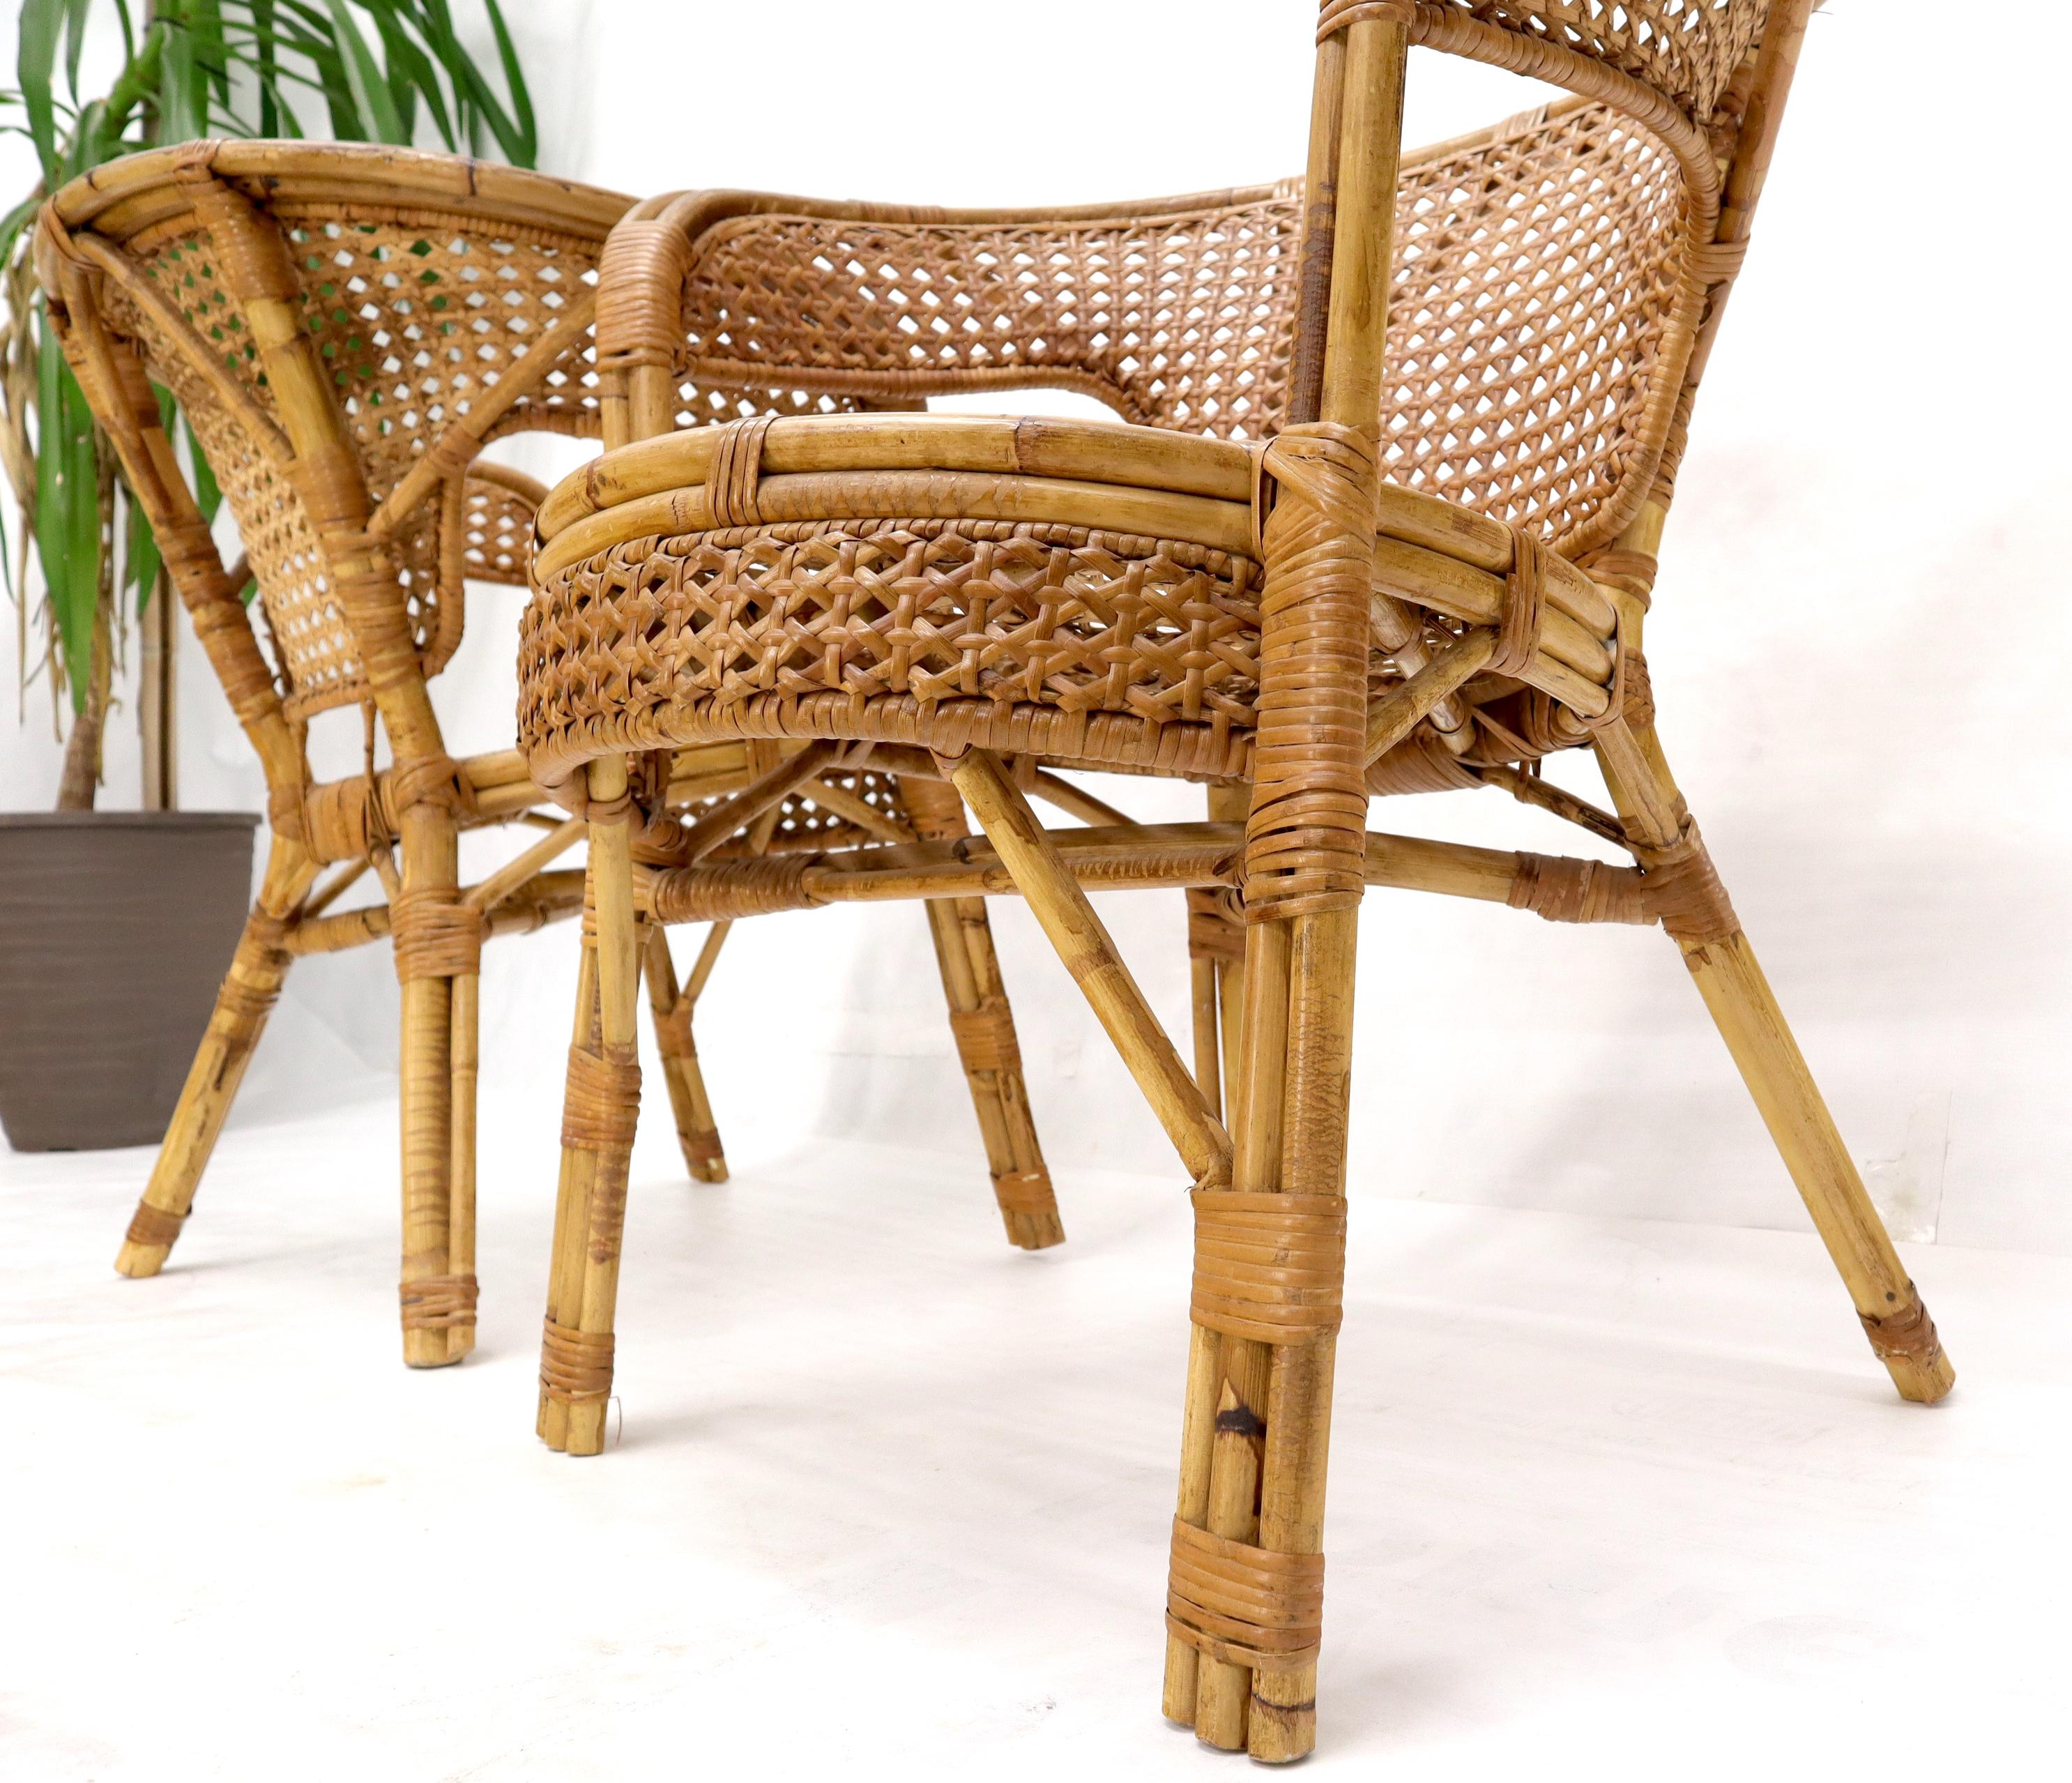 Pair of Stunning Round Barrel Shape Bamboo Rattan Cane Seat Chairs For Sale 2